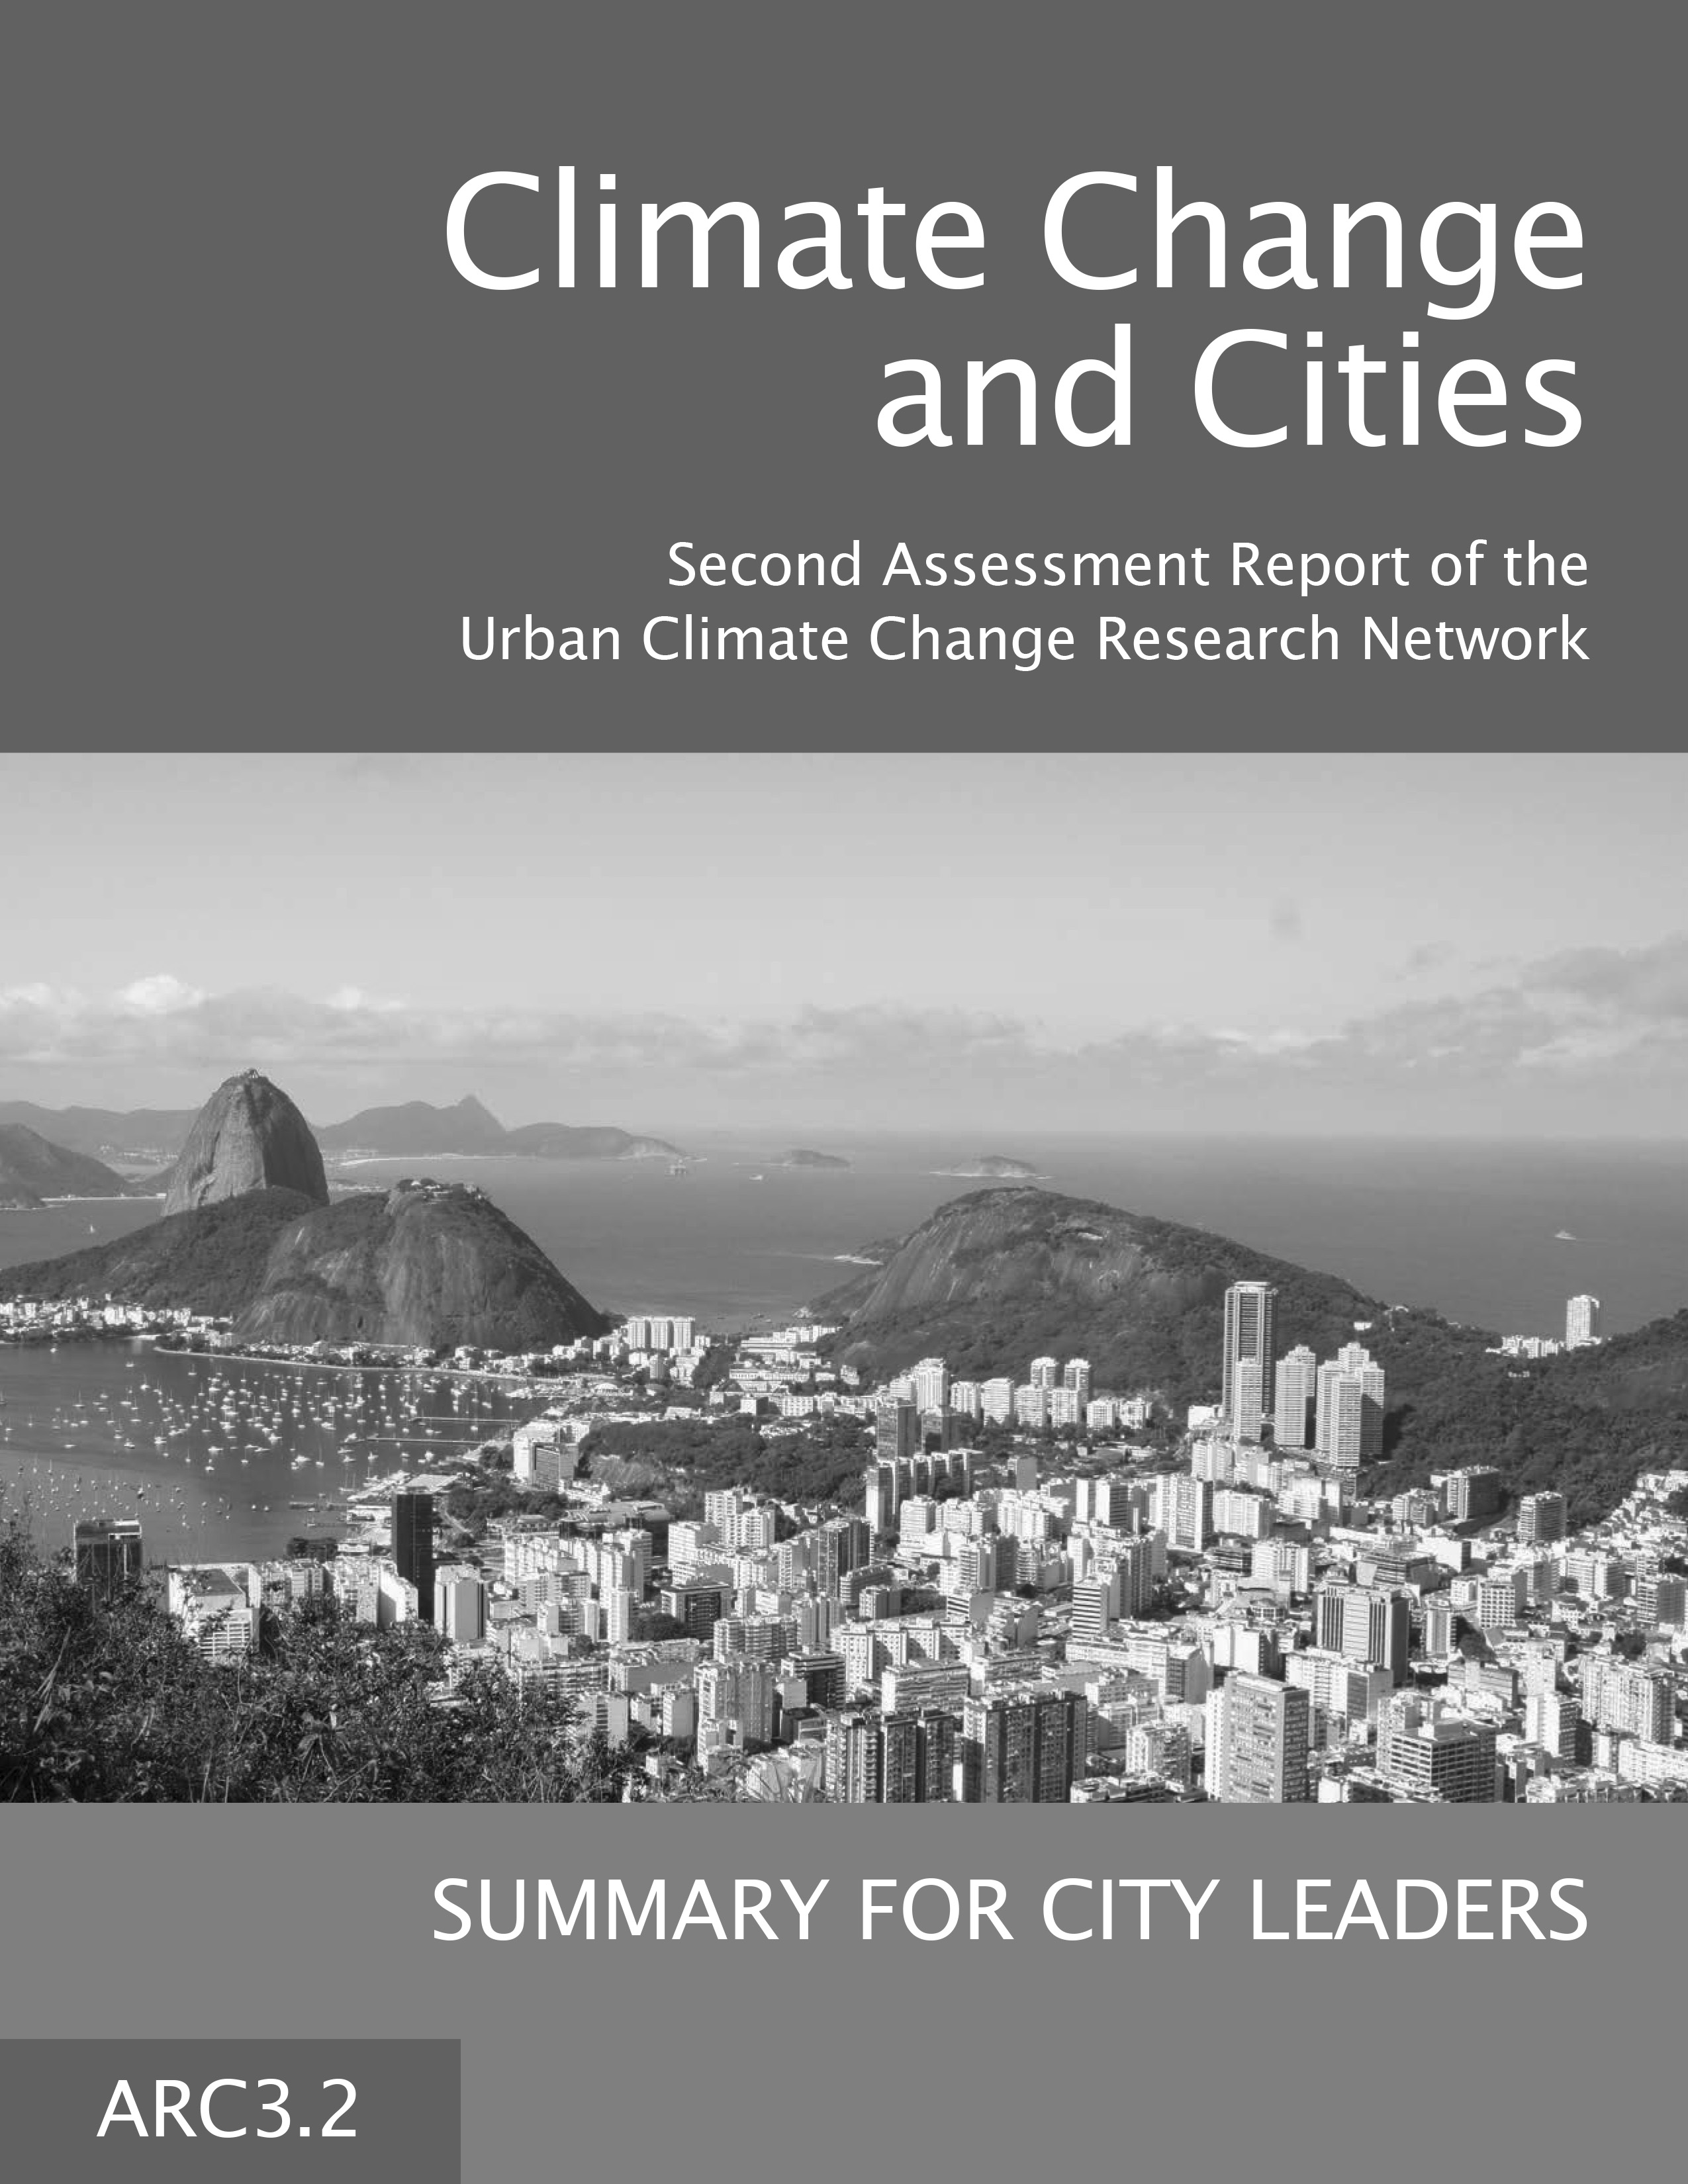 UCCRN’s Second Assessment Report on Cities and Climate Change released at IPCC Cities.